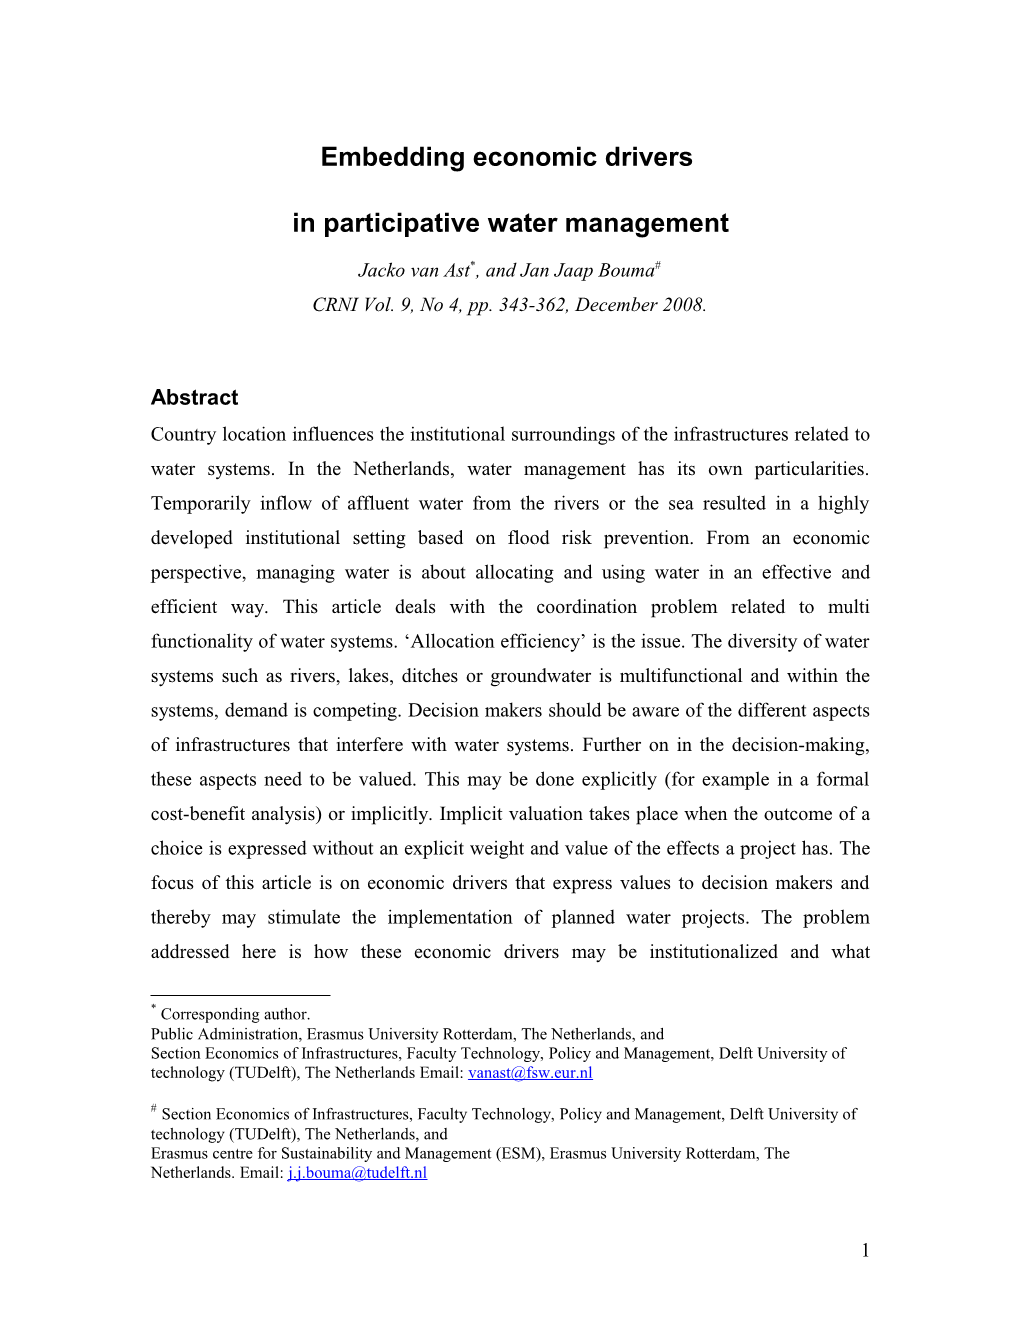 Embedding Economic Drivers Into Participative Water Management